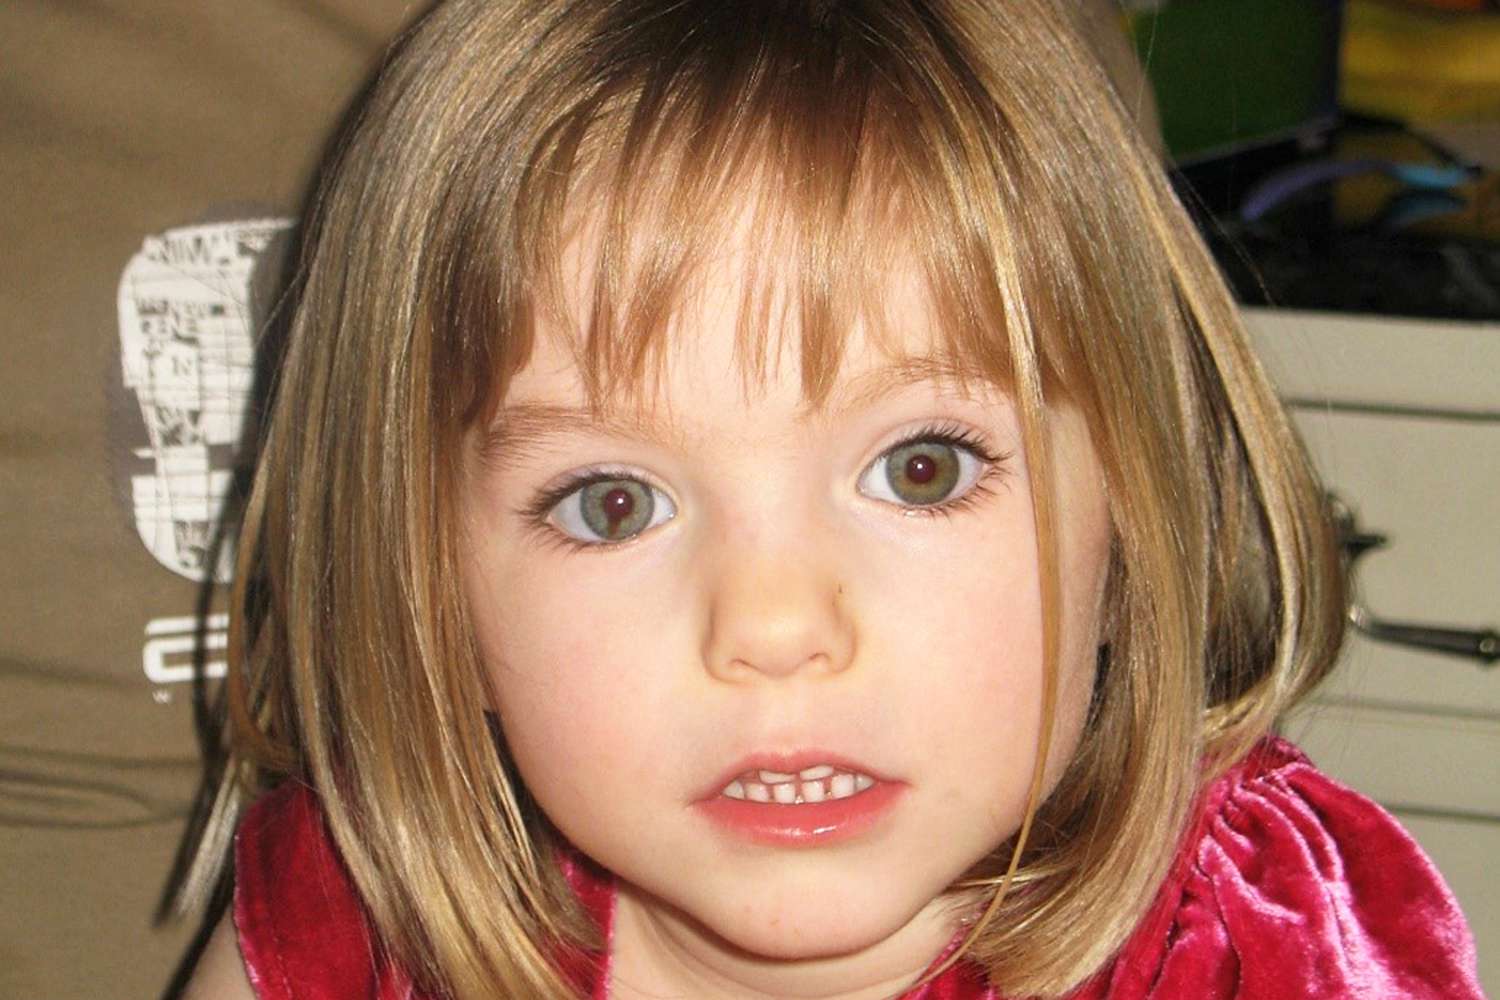 Authorities Say Email Account Links Suspect to Madeleine McCann’s Disappearance and Presumed Murder